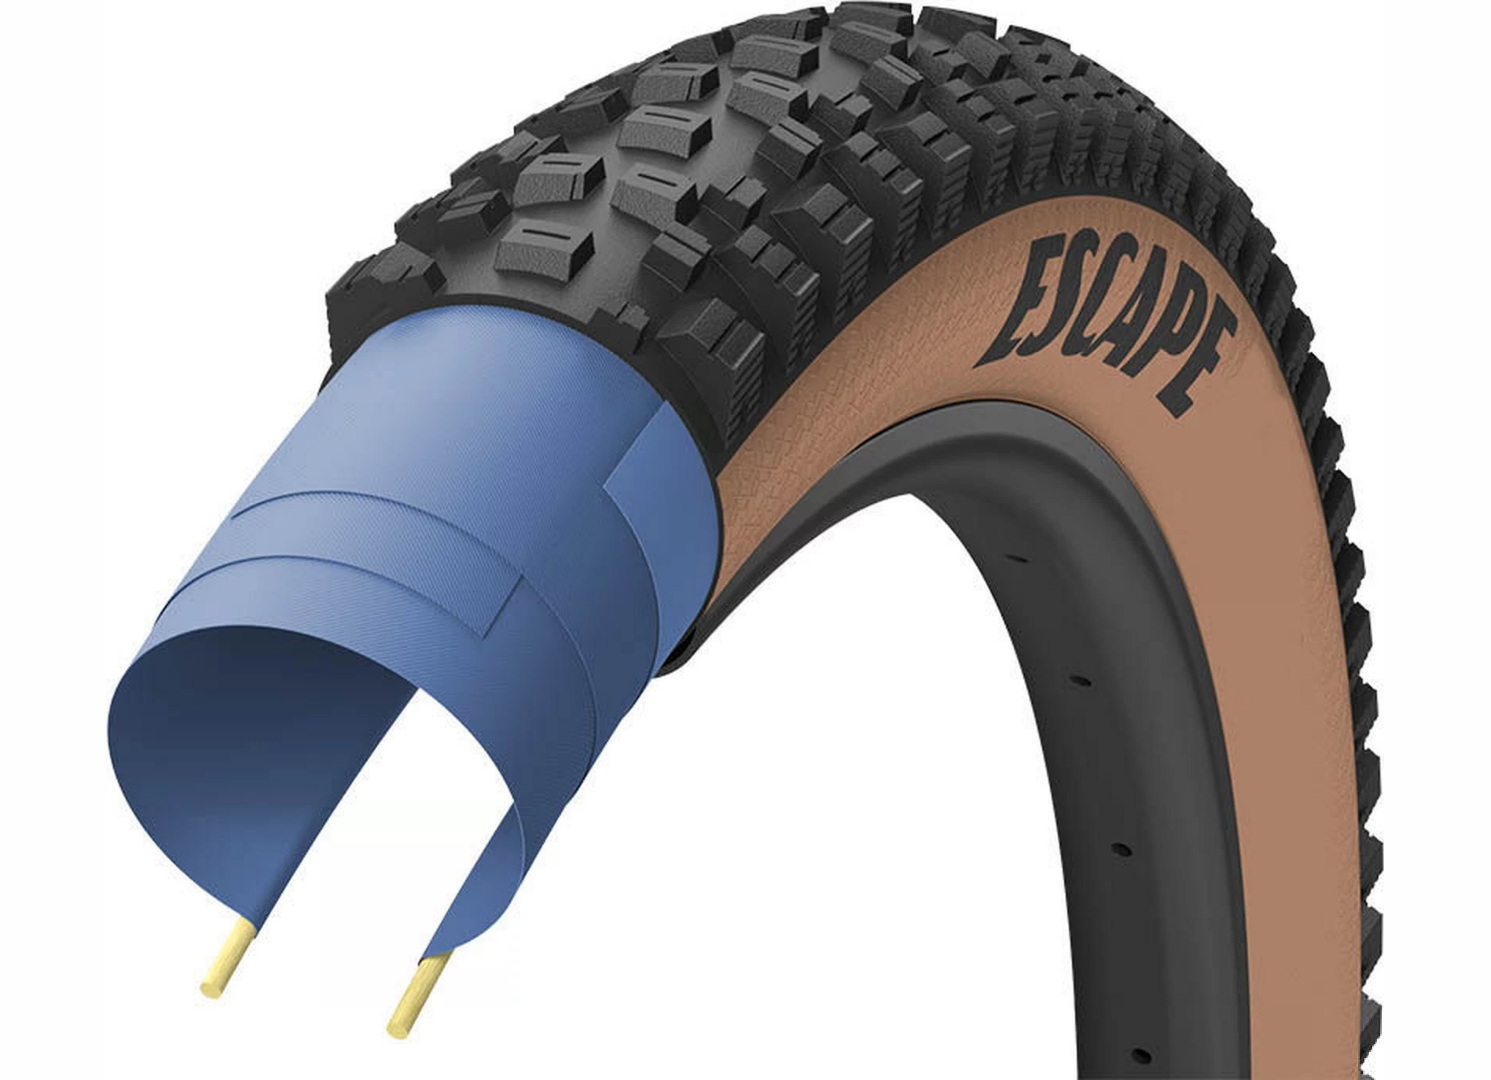 Покрышка 27.5x2.6 (66-584) GoodYear ESCAPE Ultimate Tubeless Complete, Blk/Tan фото 